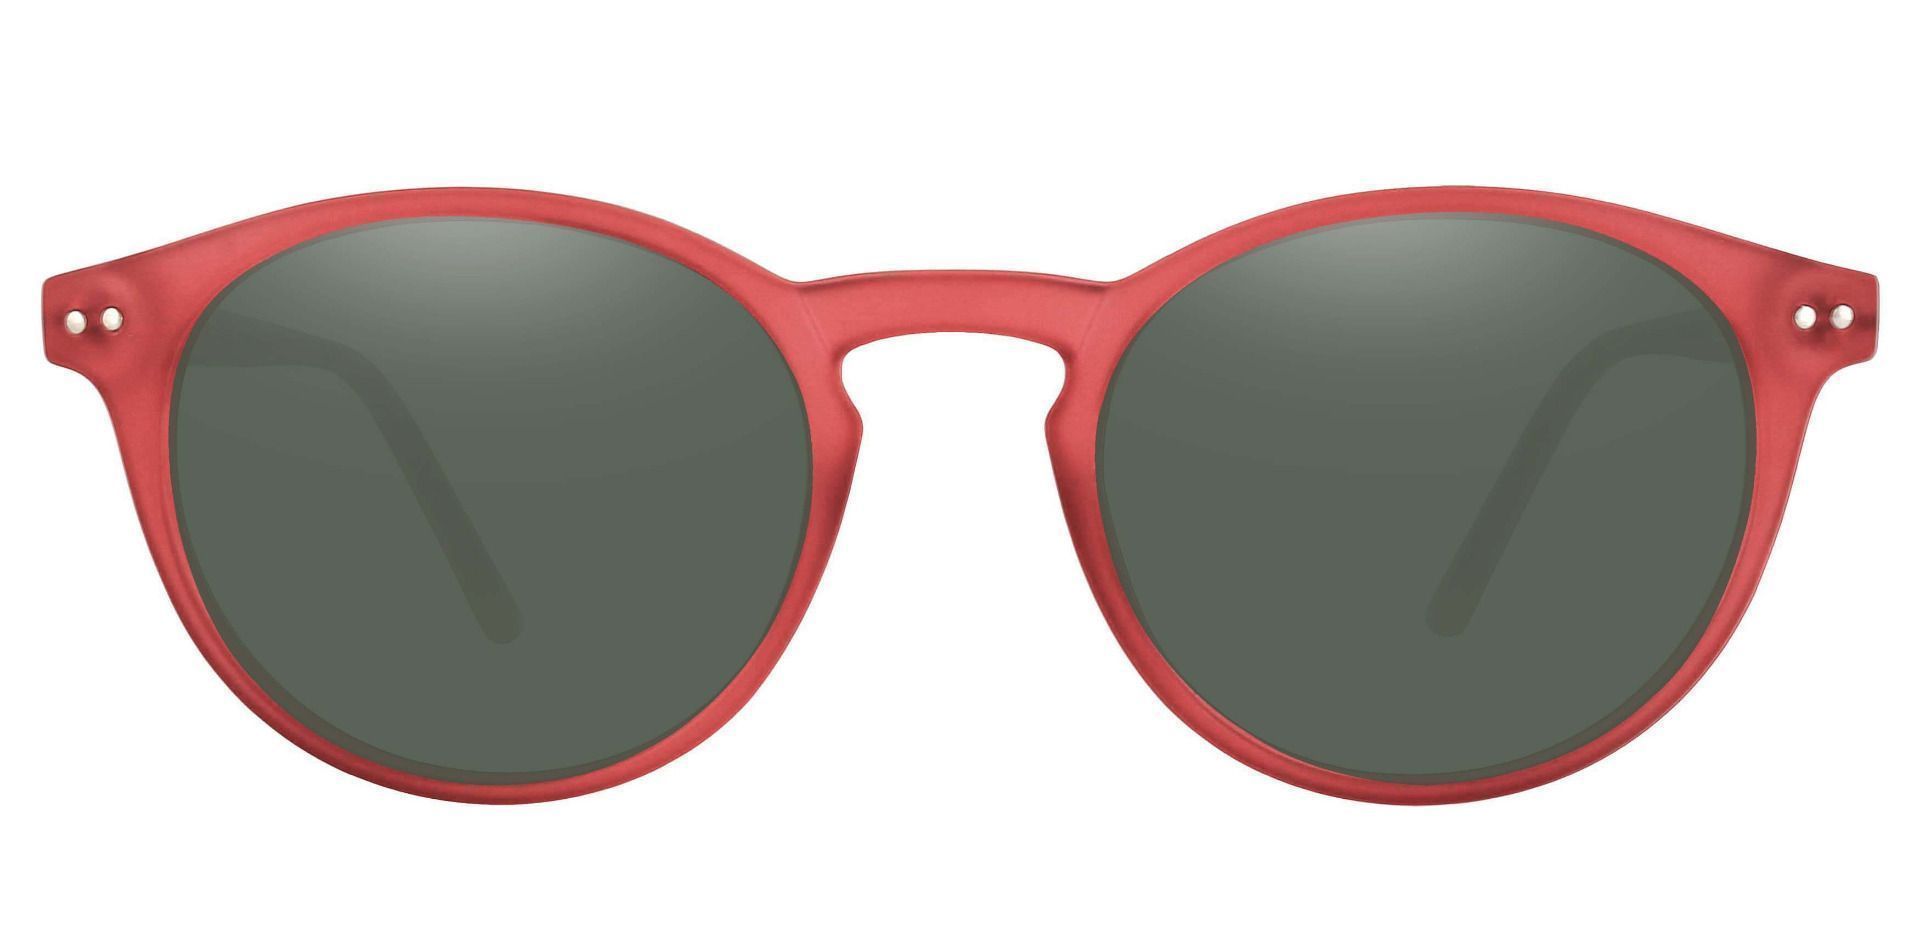 Harmony Oval Prescription Sunglasses - Red Frame With Green Lenses